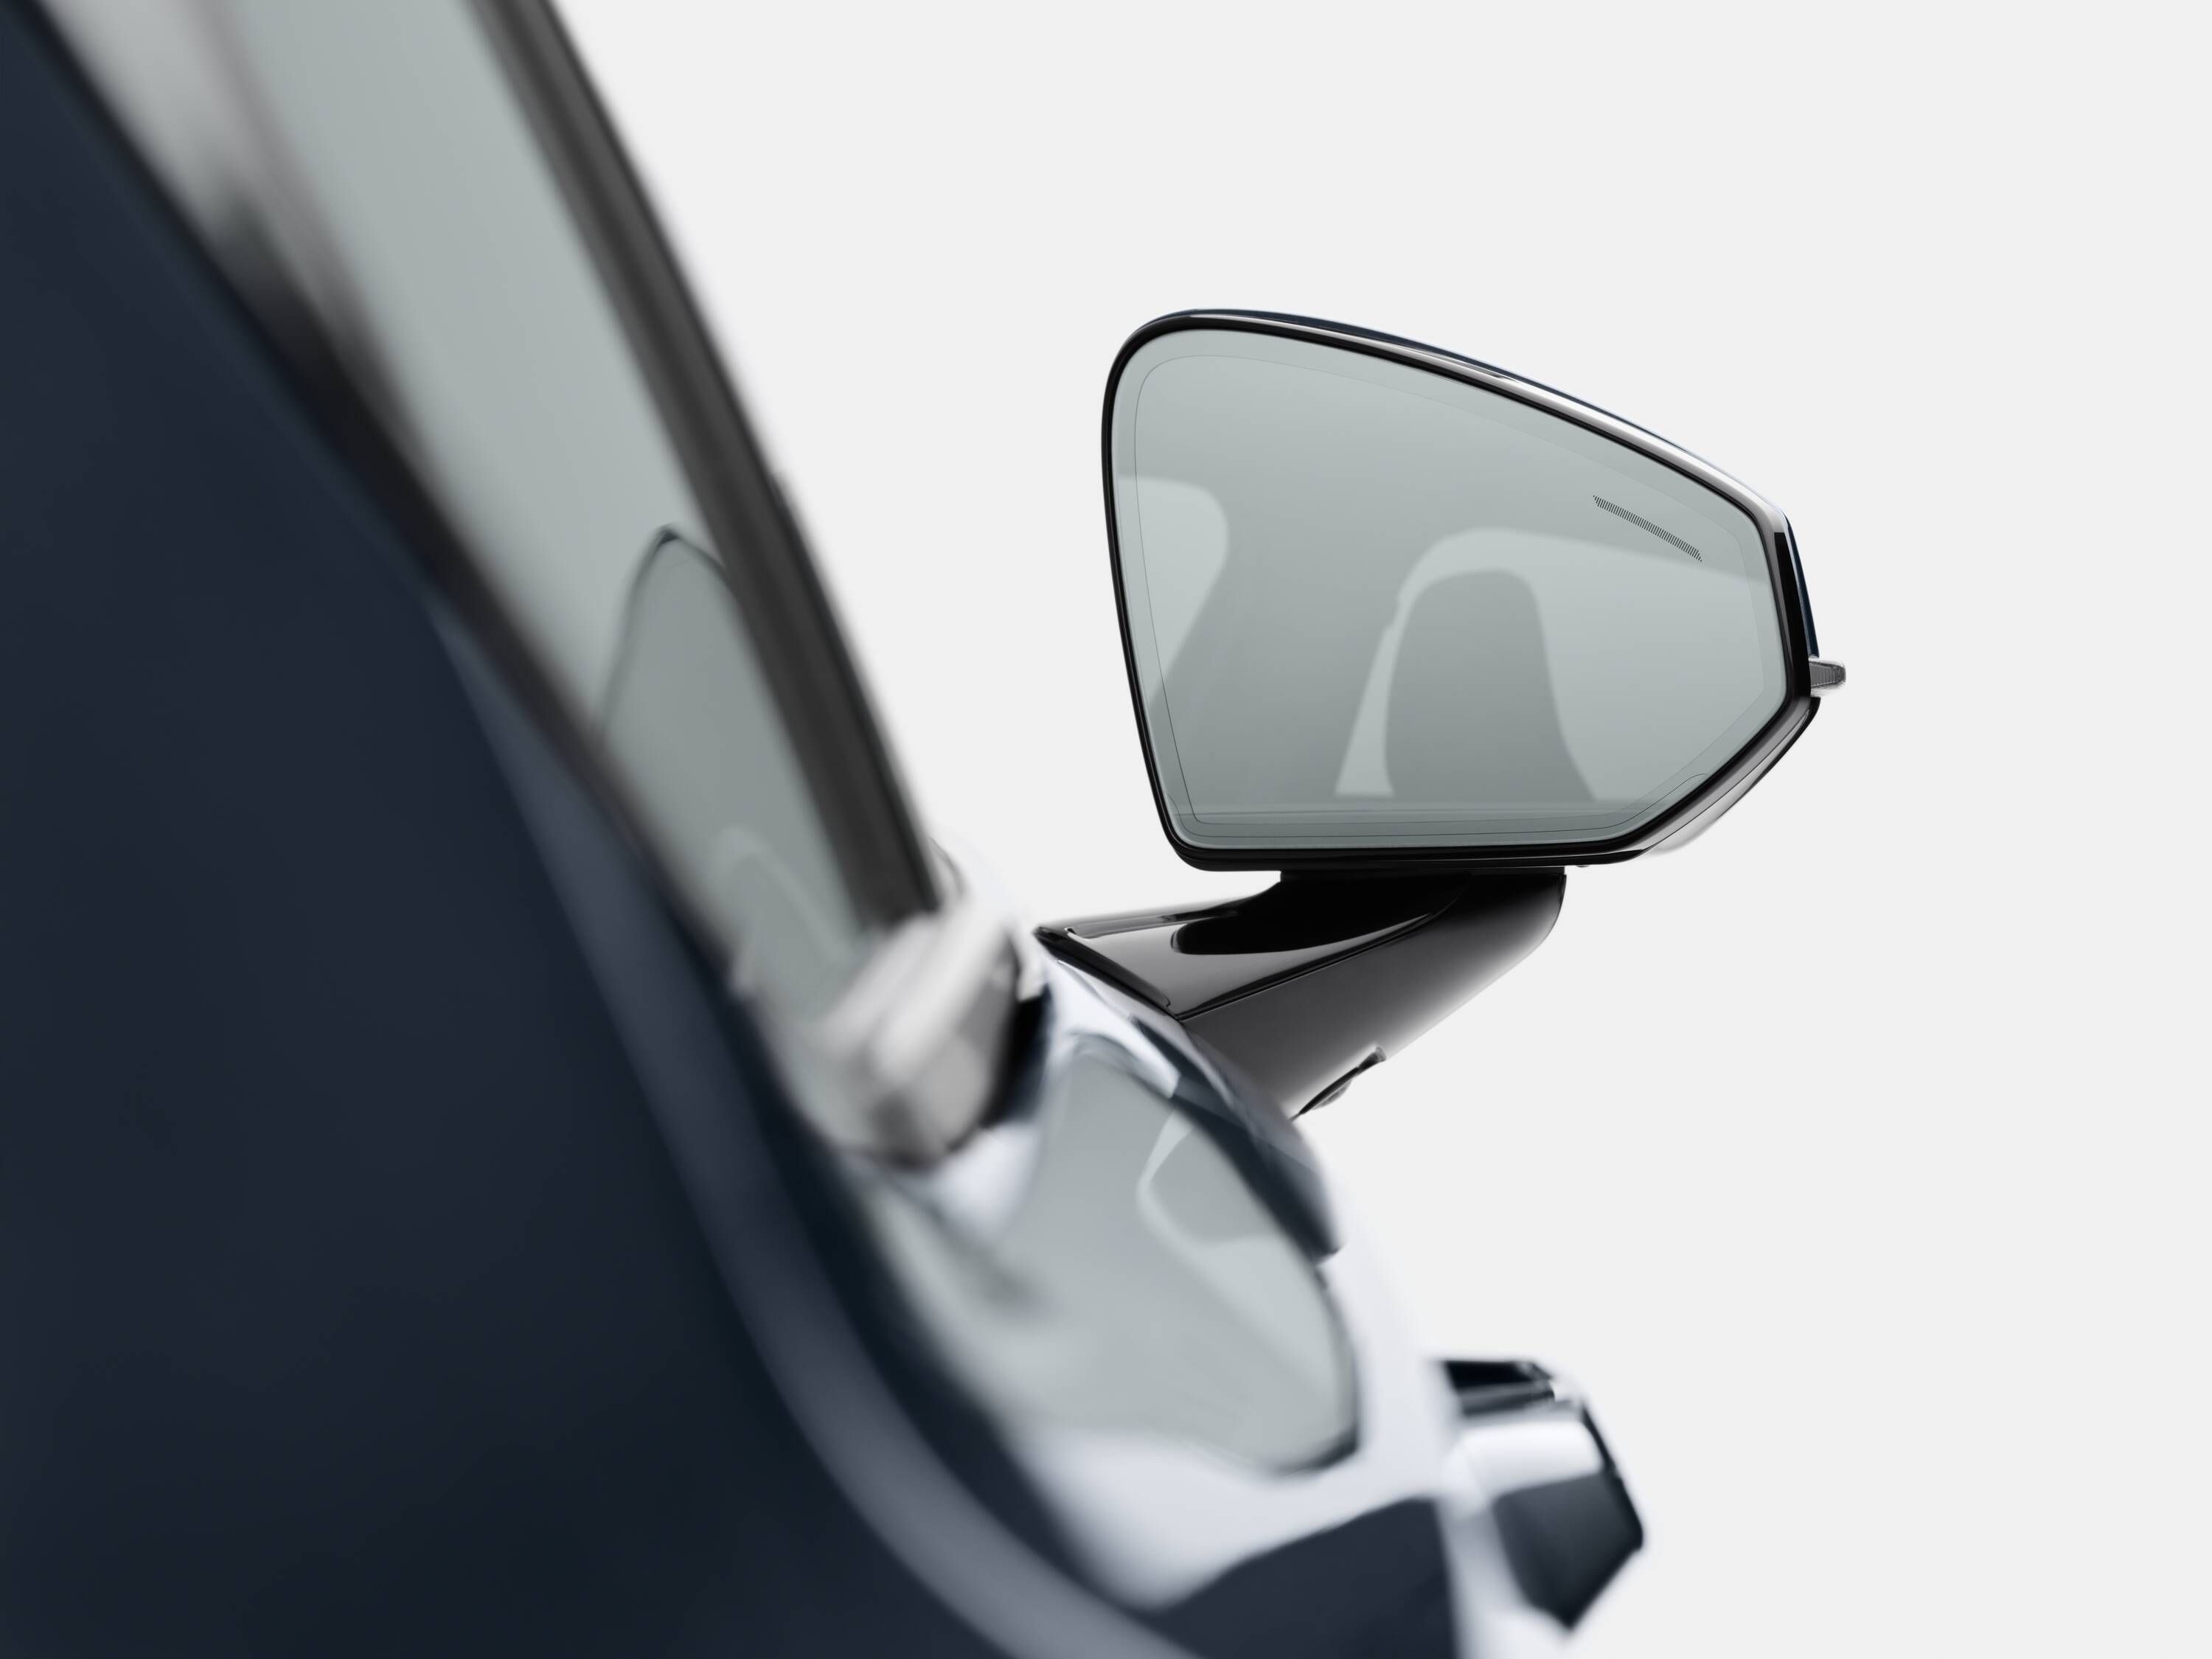 Exterior side mirror of Polestar 2 from the back of the car